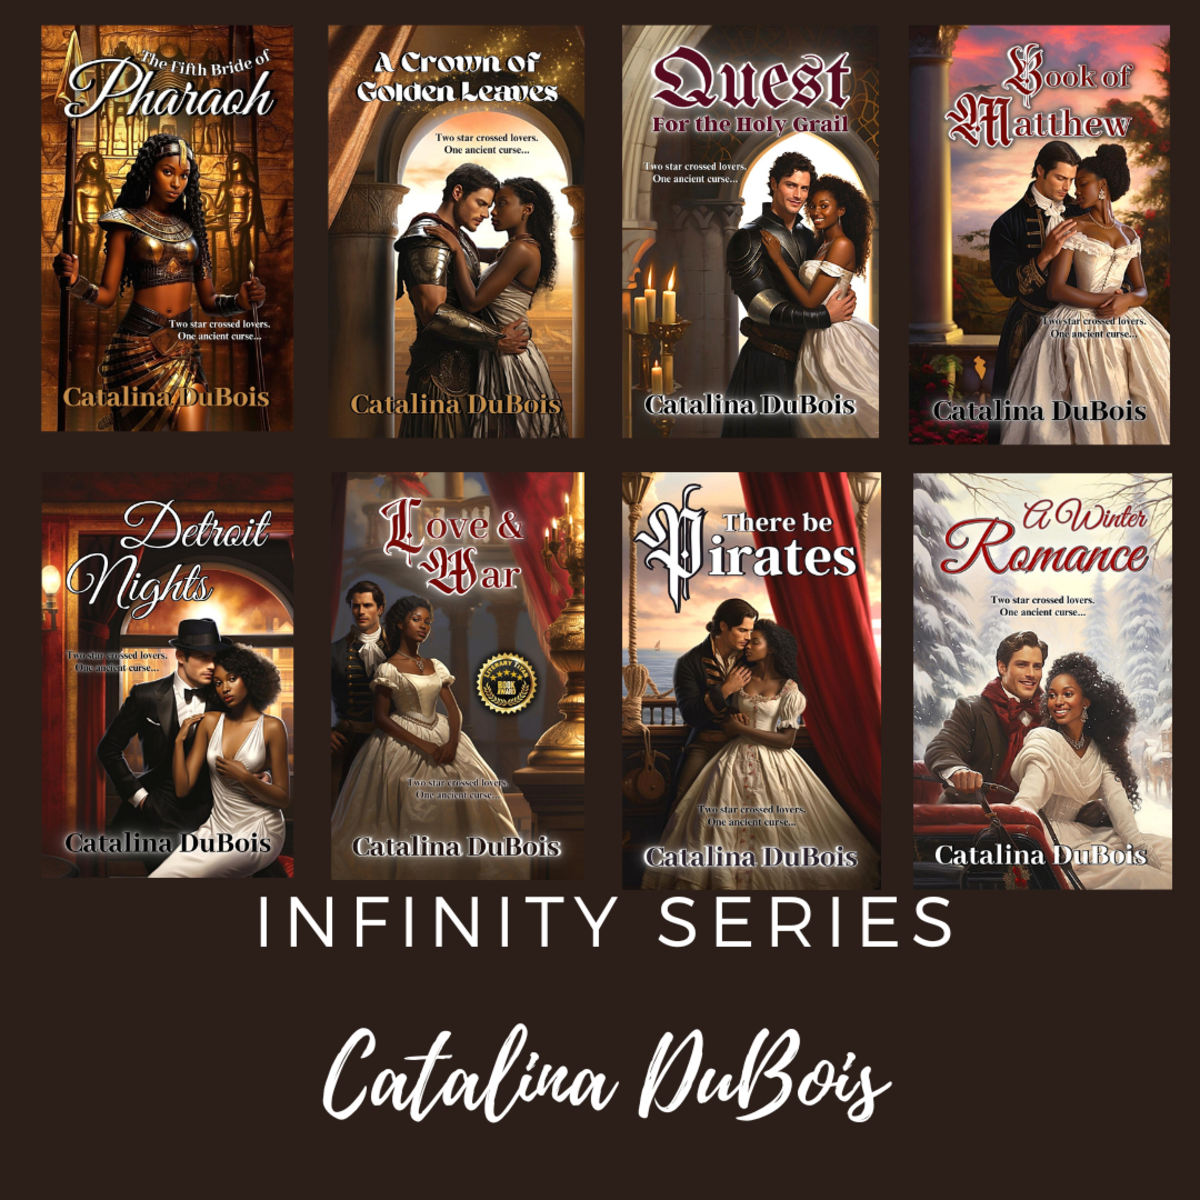 The Infinity Series: Historical Romance Novels by Catalina Dubois